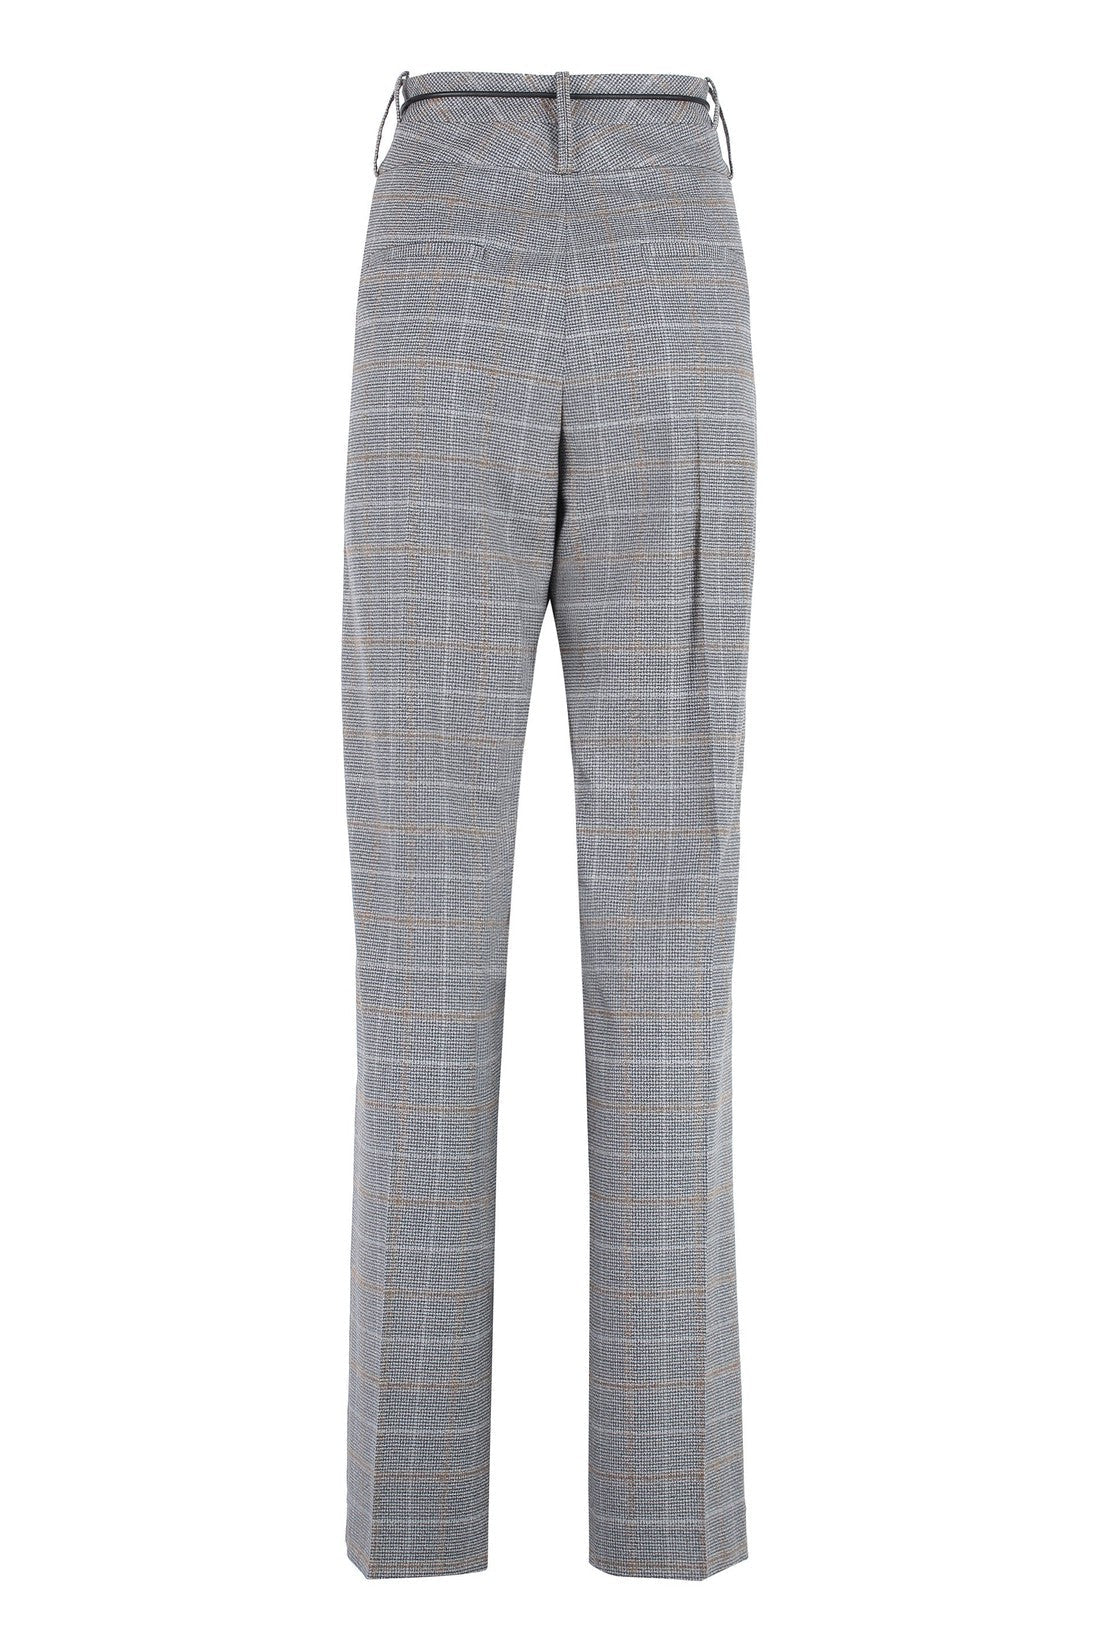 Peserico-OUTLET-SALE-Prince of Wales checked wool trousers-ARCHIVIST